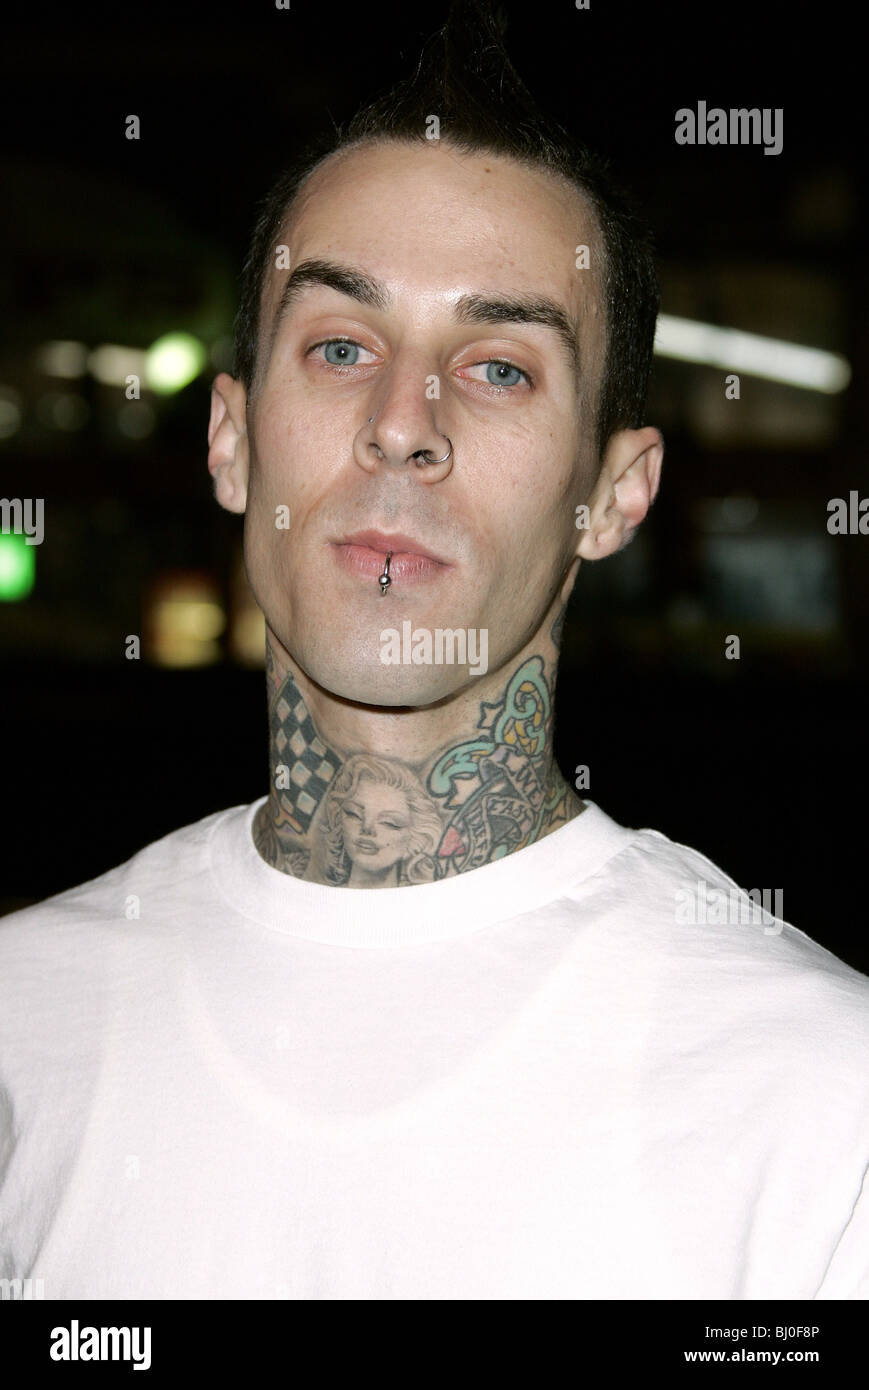 Travis Barker High Resolution Stock Photography And Images Alamy 8yr · atticus138 · r/blink182. https www alamy com stock photo travis barker drummer blink 182 chinese theatre hollywood los angeles 28286182 html